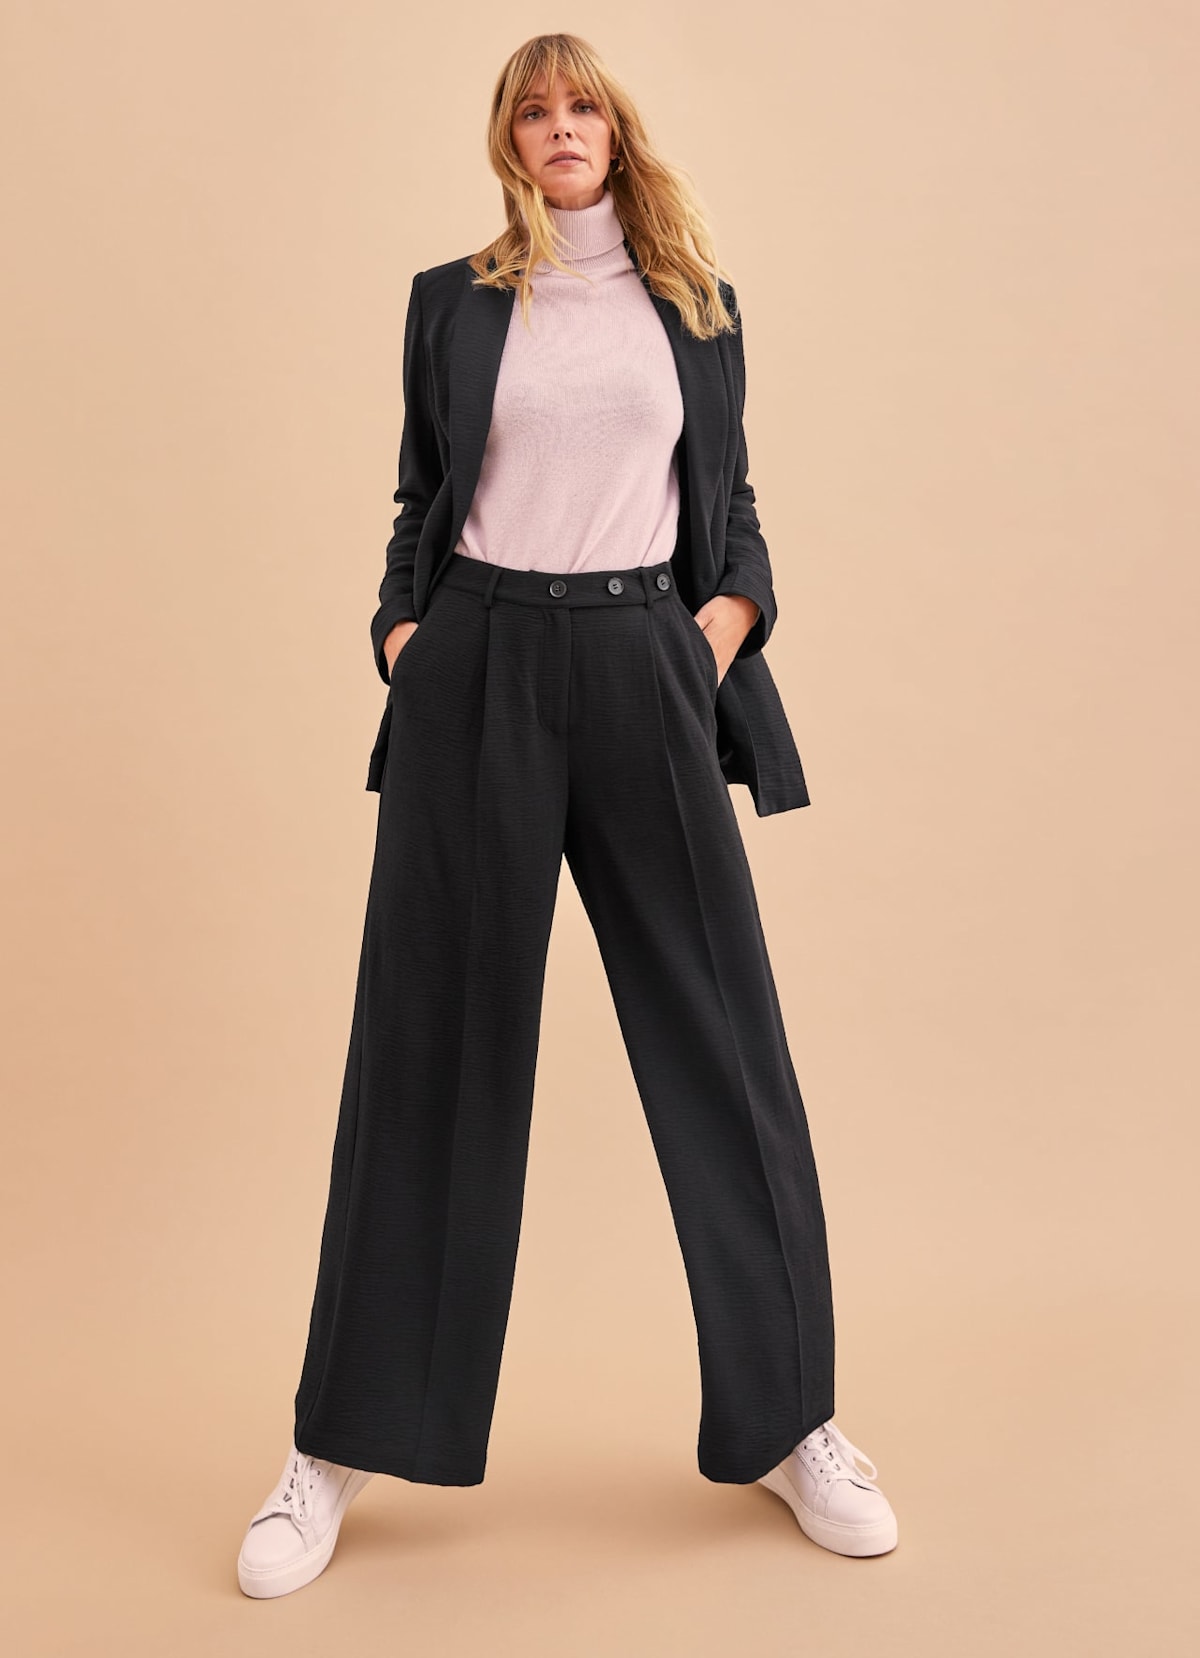 Woman modelling black suit co-ord with trainers